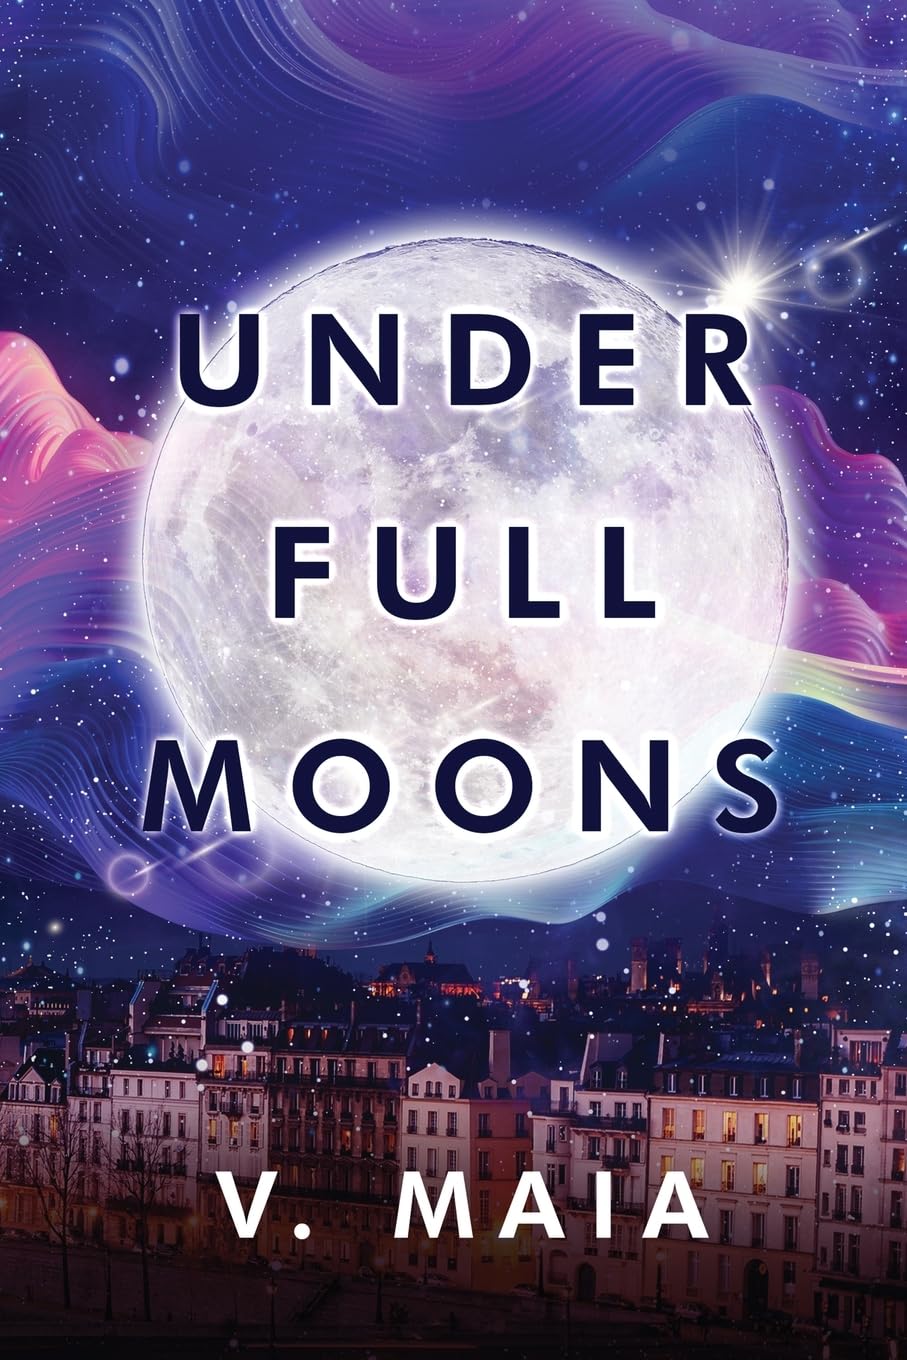 New novel "Under Full Moons" by V. Maia is released, a unique story that combines one man’s slice-of-life struggles with an epic sci-fi adventure that will determine the fate of the universe